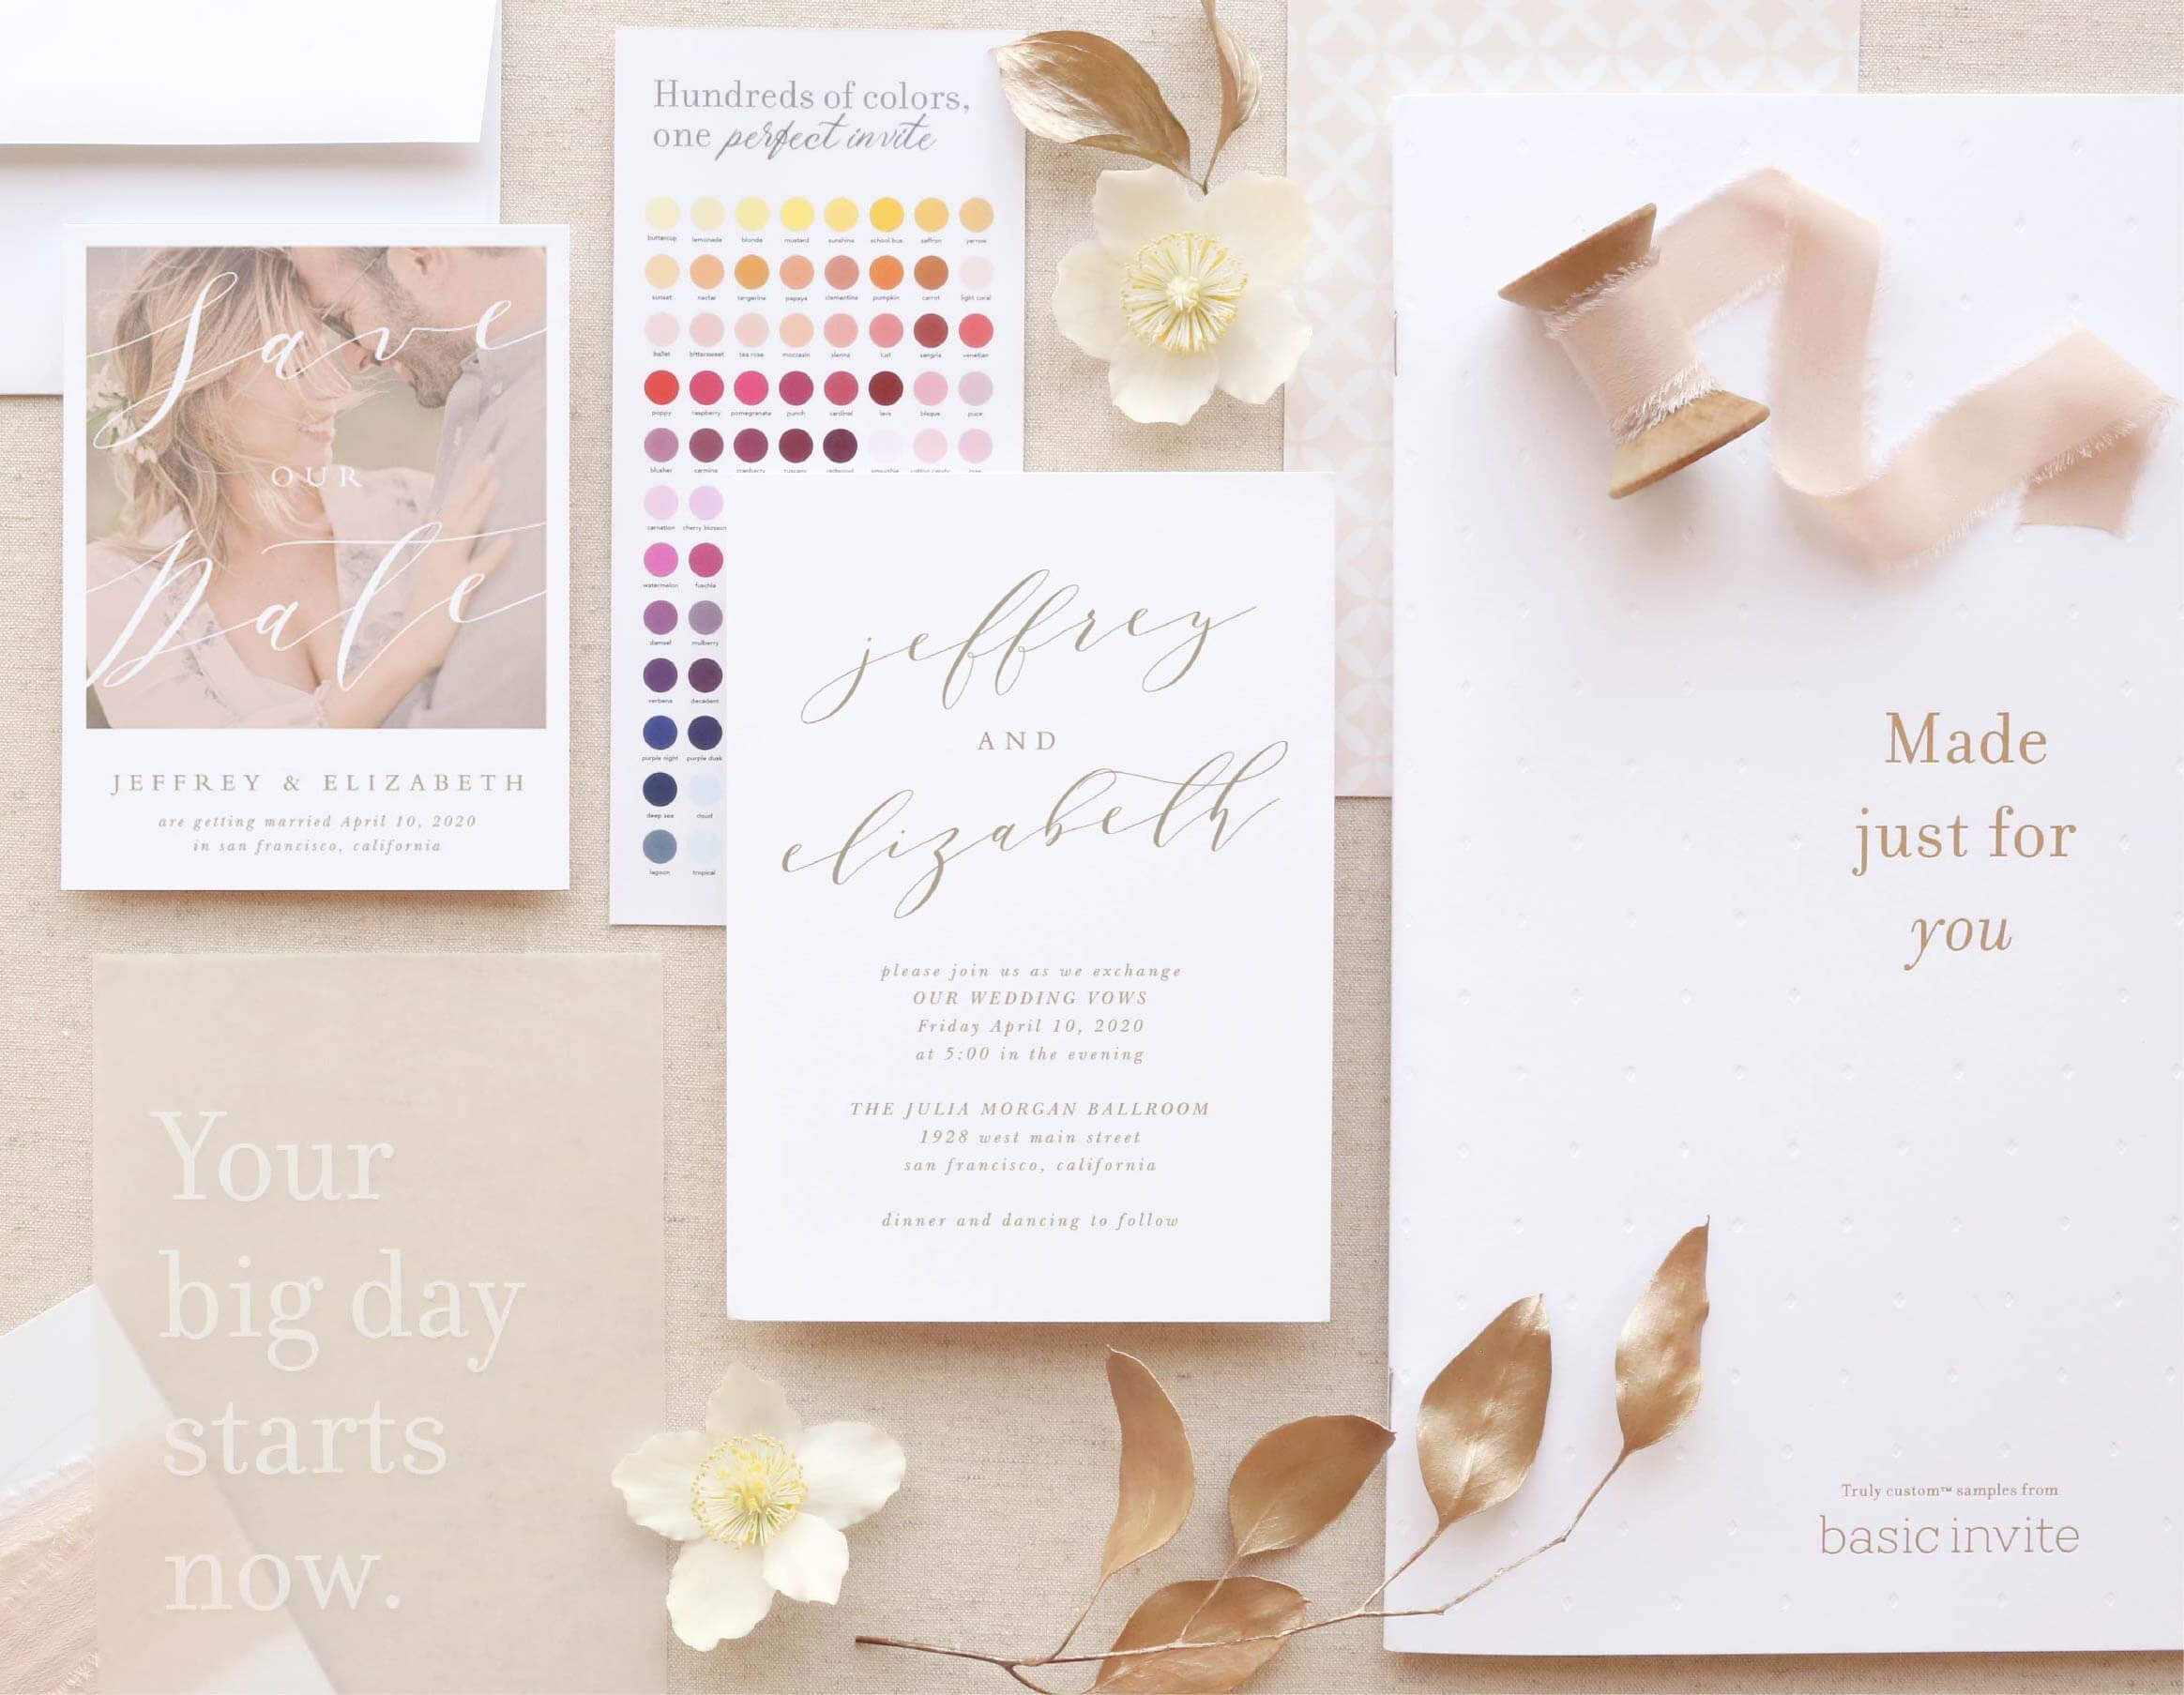 Invitations, Announcements, And Photo Cards | Basic Invite Intended For Free E Wedding Invitation Card Templates